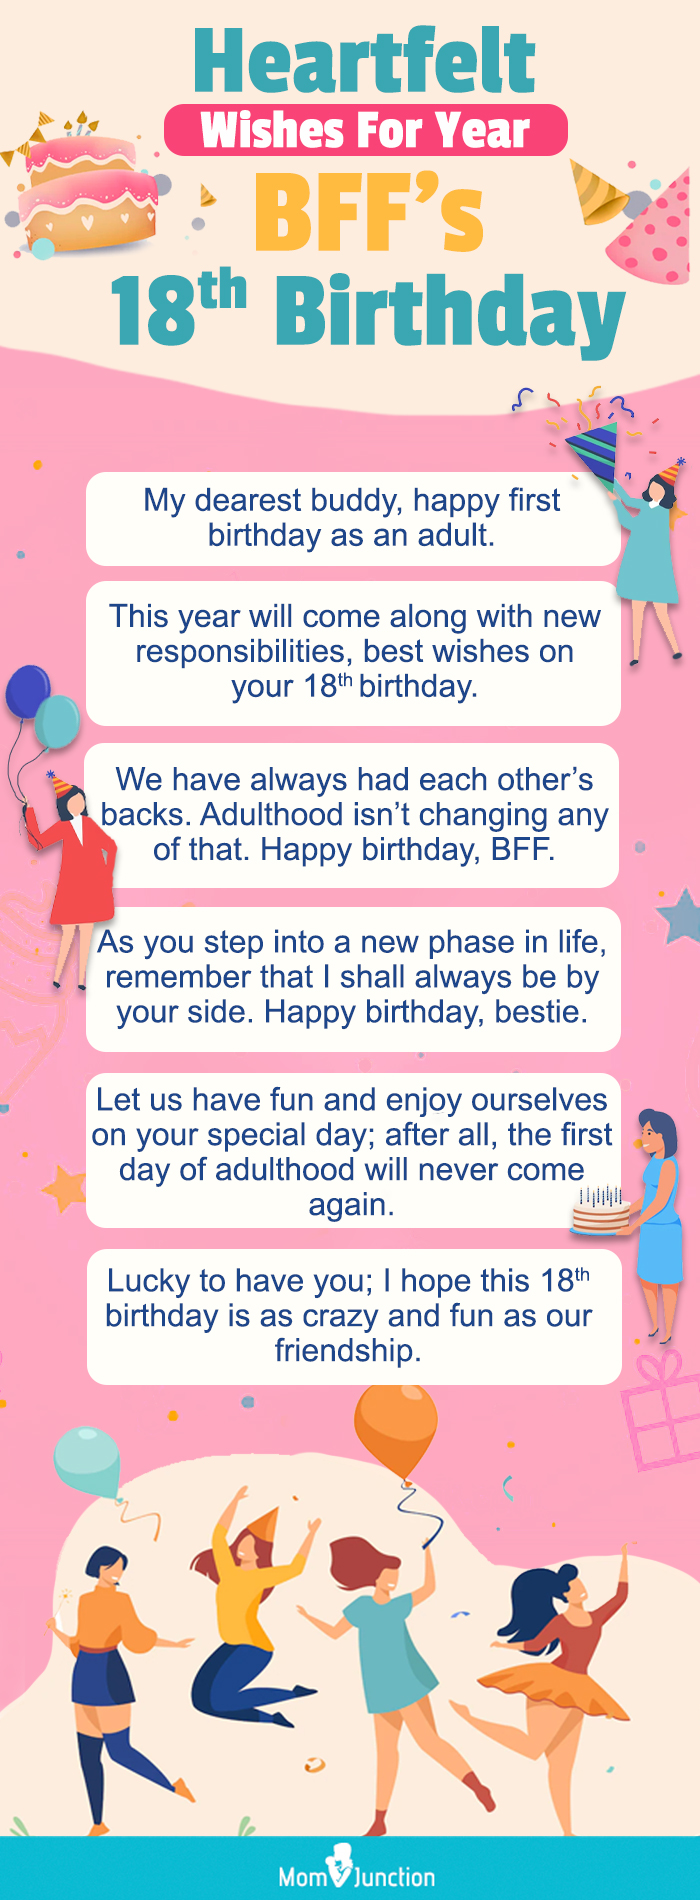 heartfelt wishes for your bff s 18th birthday (infographic)